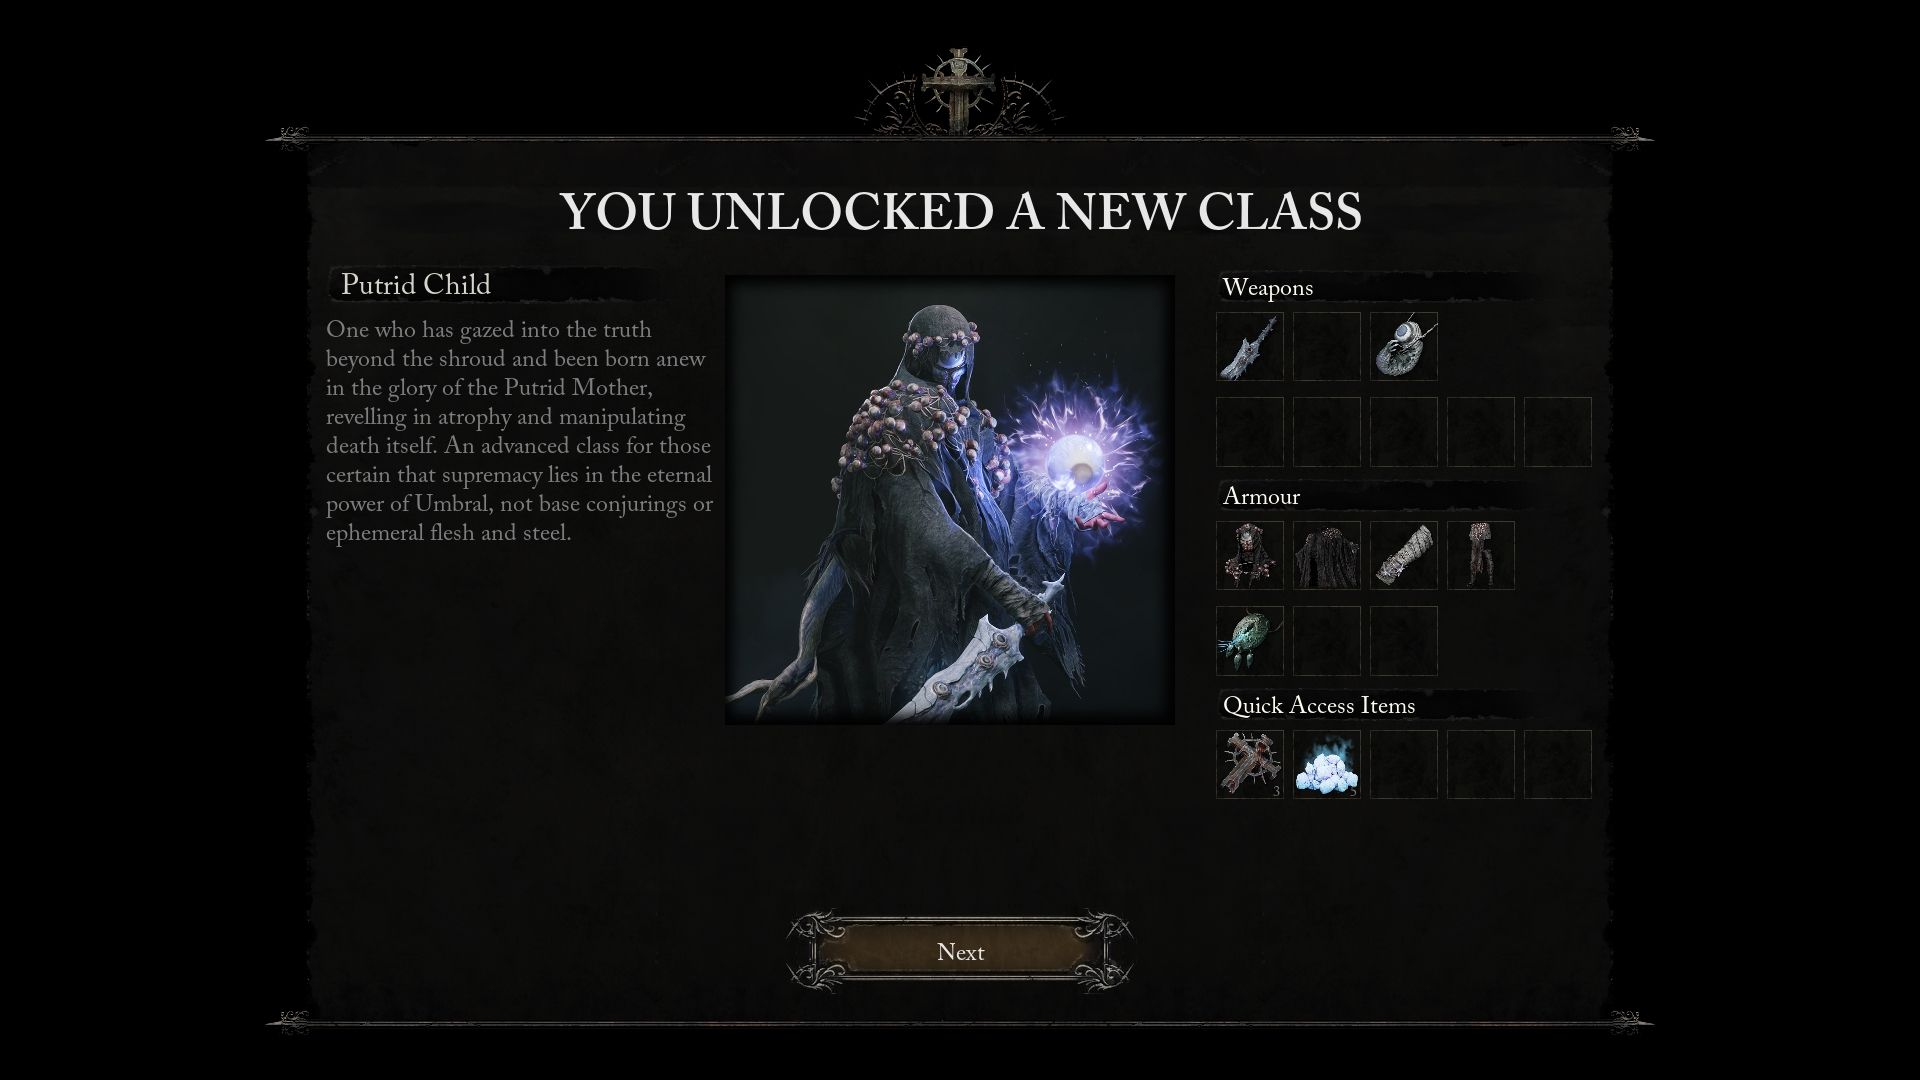 A prompt showing that the player unlocked a new class called Putrid Child Lords of the Fallen